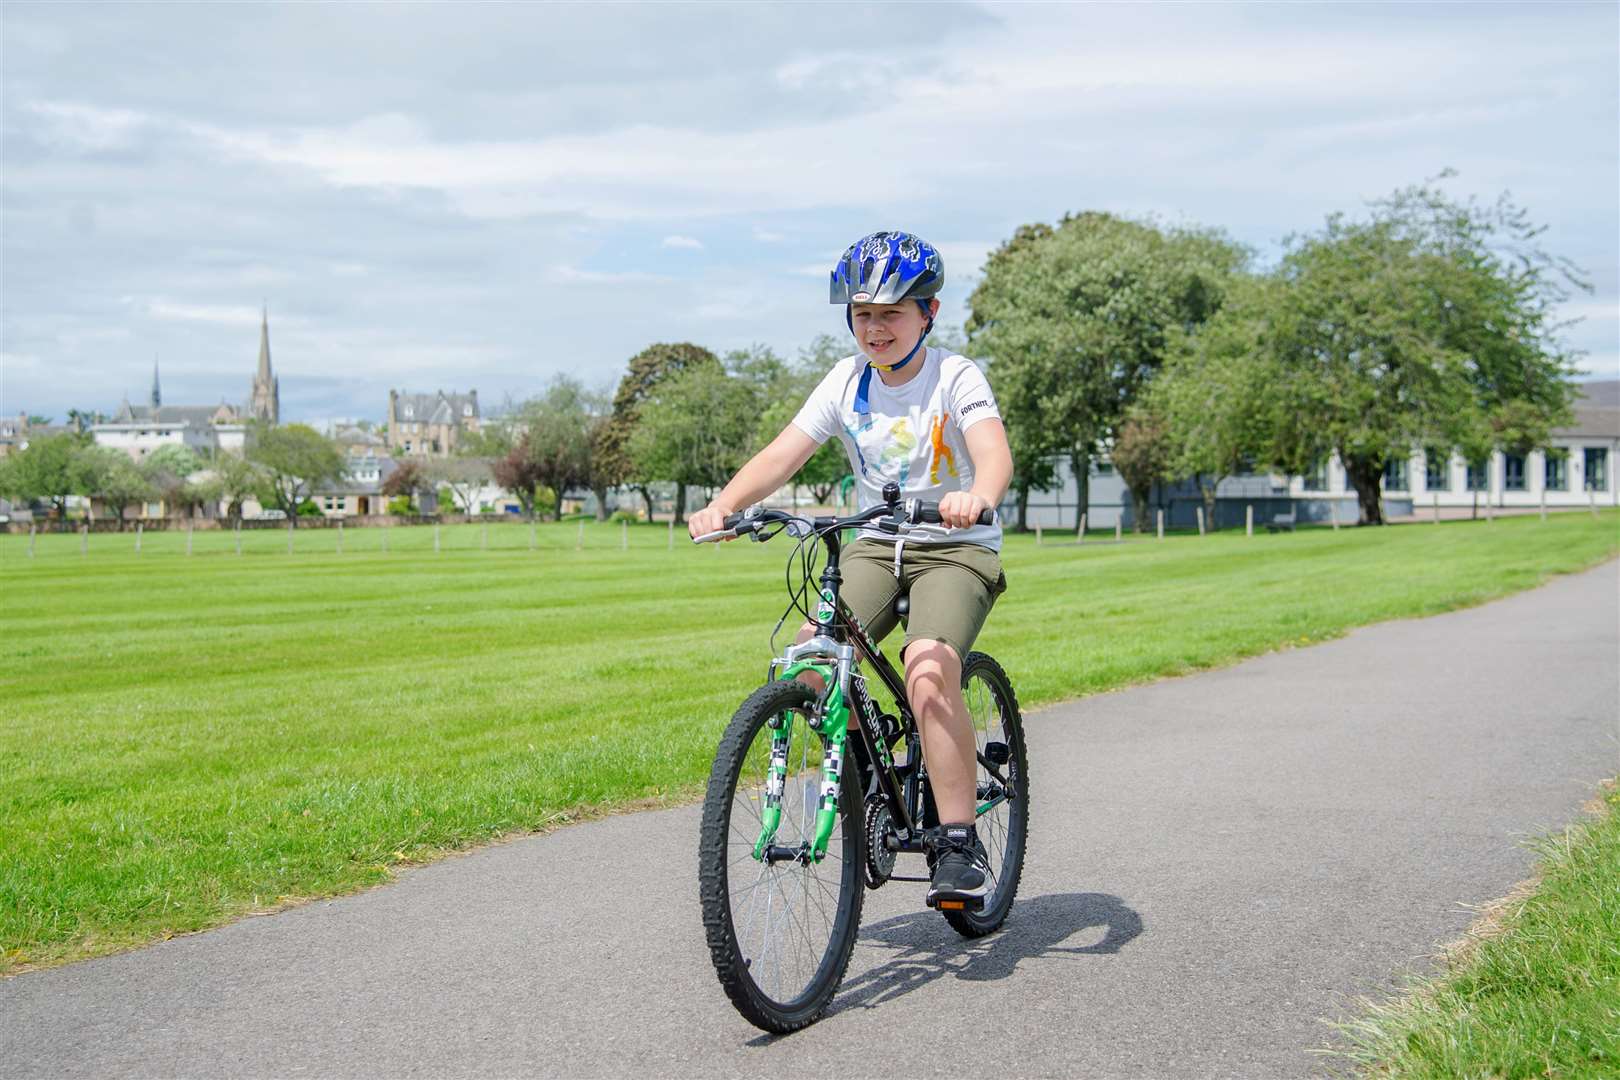 8-year-old Kristian Ross, from Forres, is cycling the distance from his home to Edinburgh Zoo as he raises money for the Highland Wildlife Park. Picture: Daniel Forsyth.